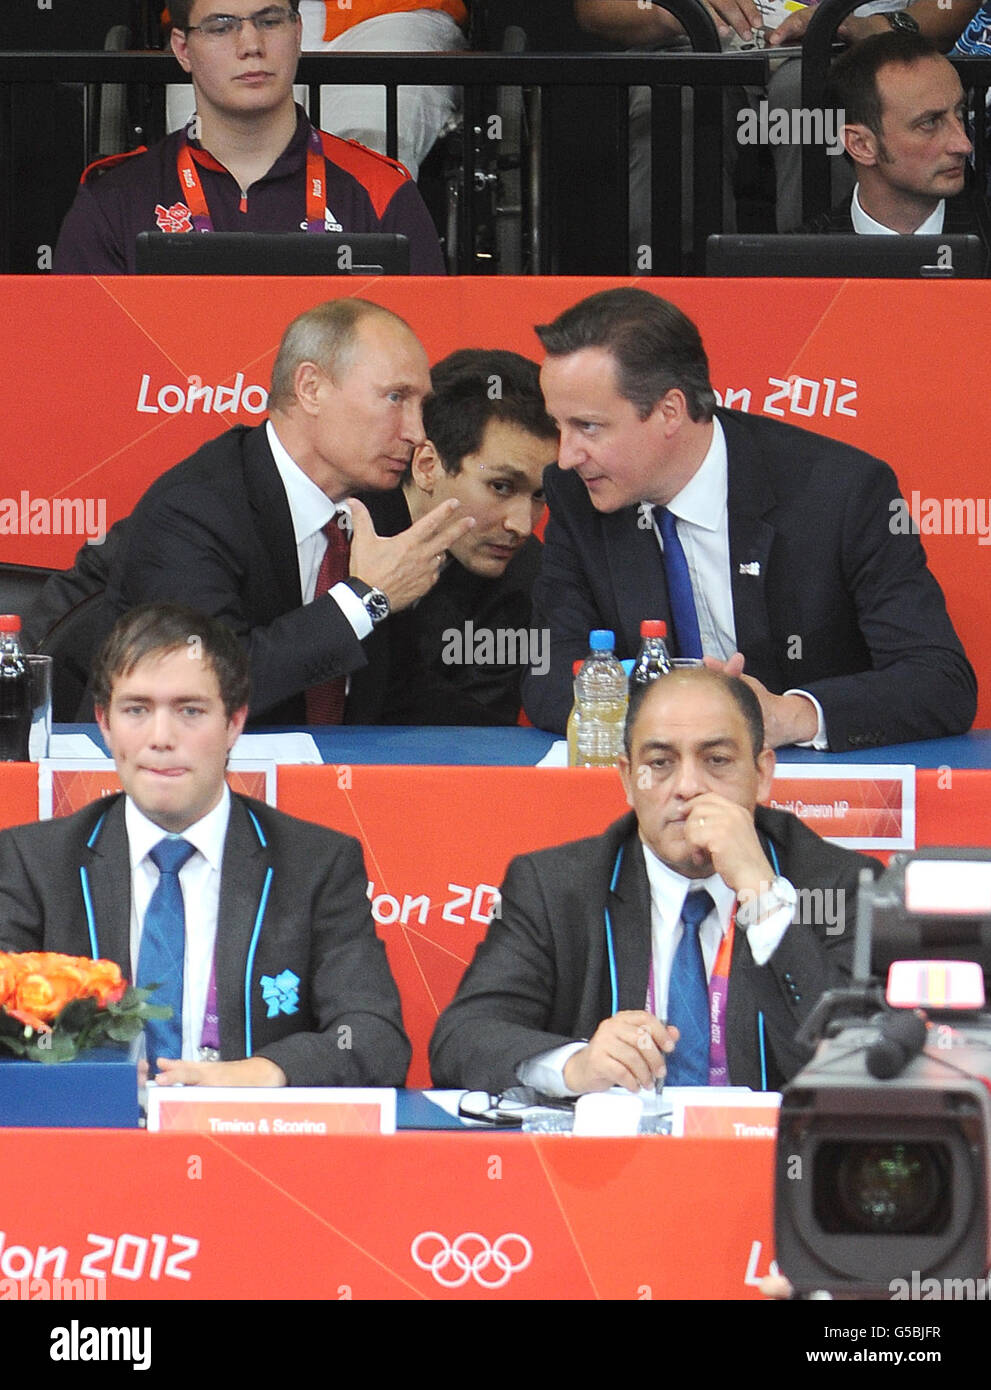 Prime Minister David Cameron and Russian President Vladimir Putin (left)talk during the Women's Judo 78kg semi-final in the North Arena at the ExCel, London, on the sixth day of the London 2012 Olympics. Stock Photo